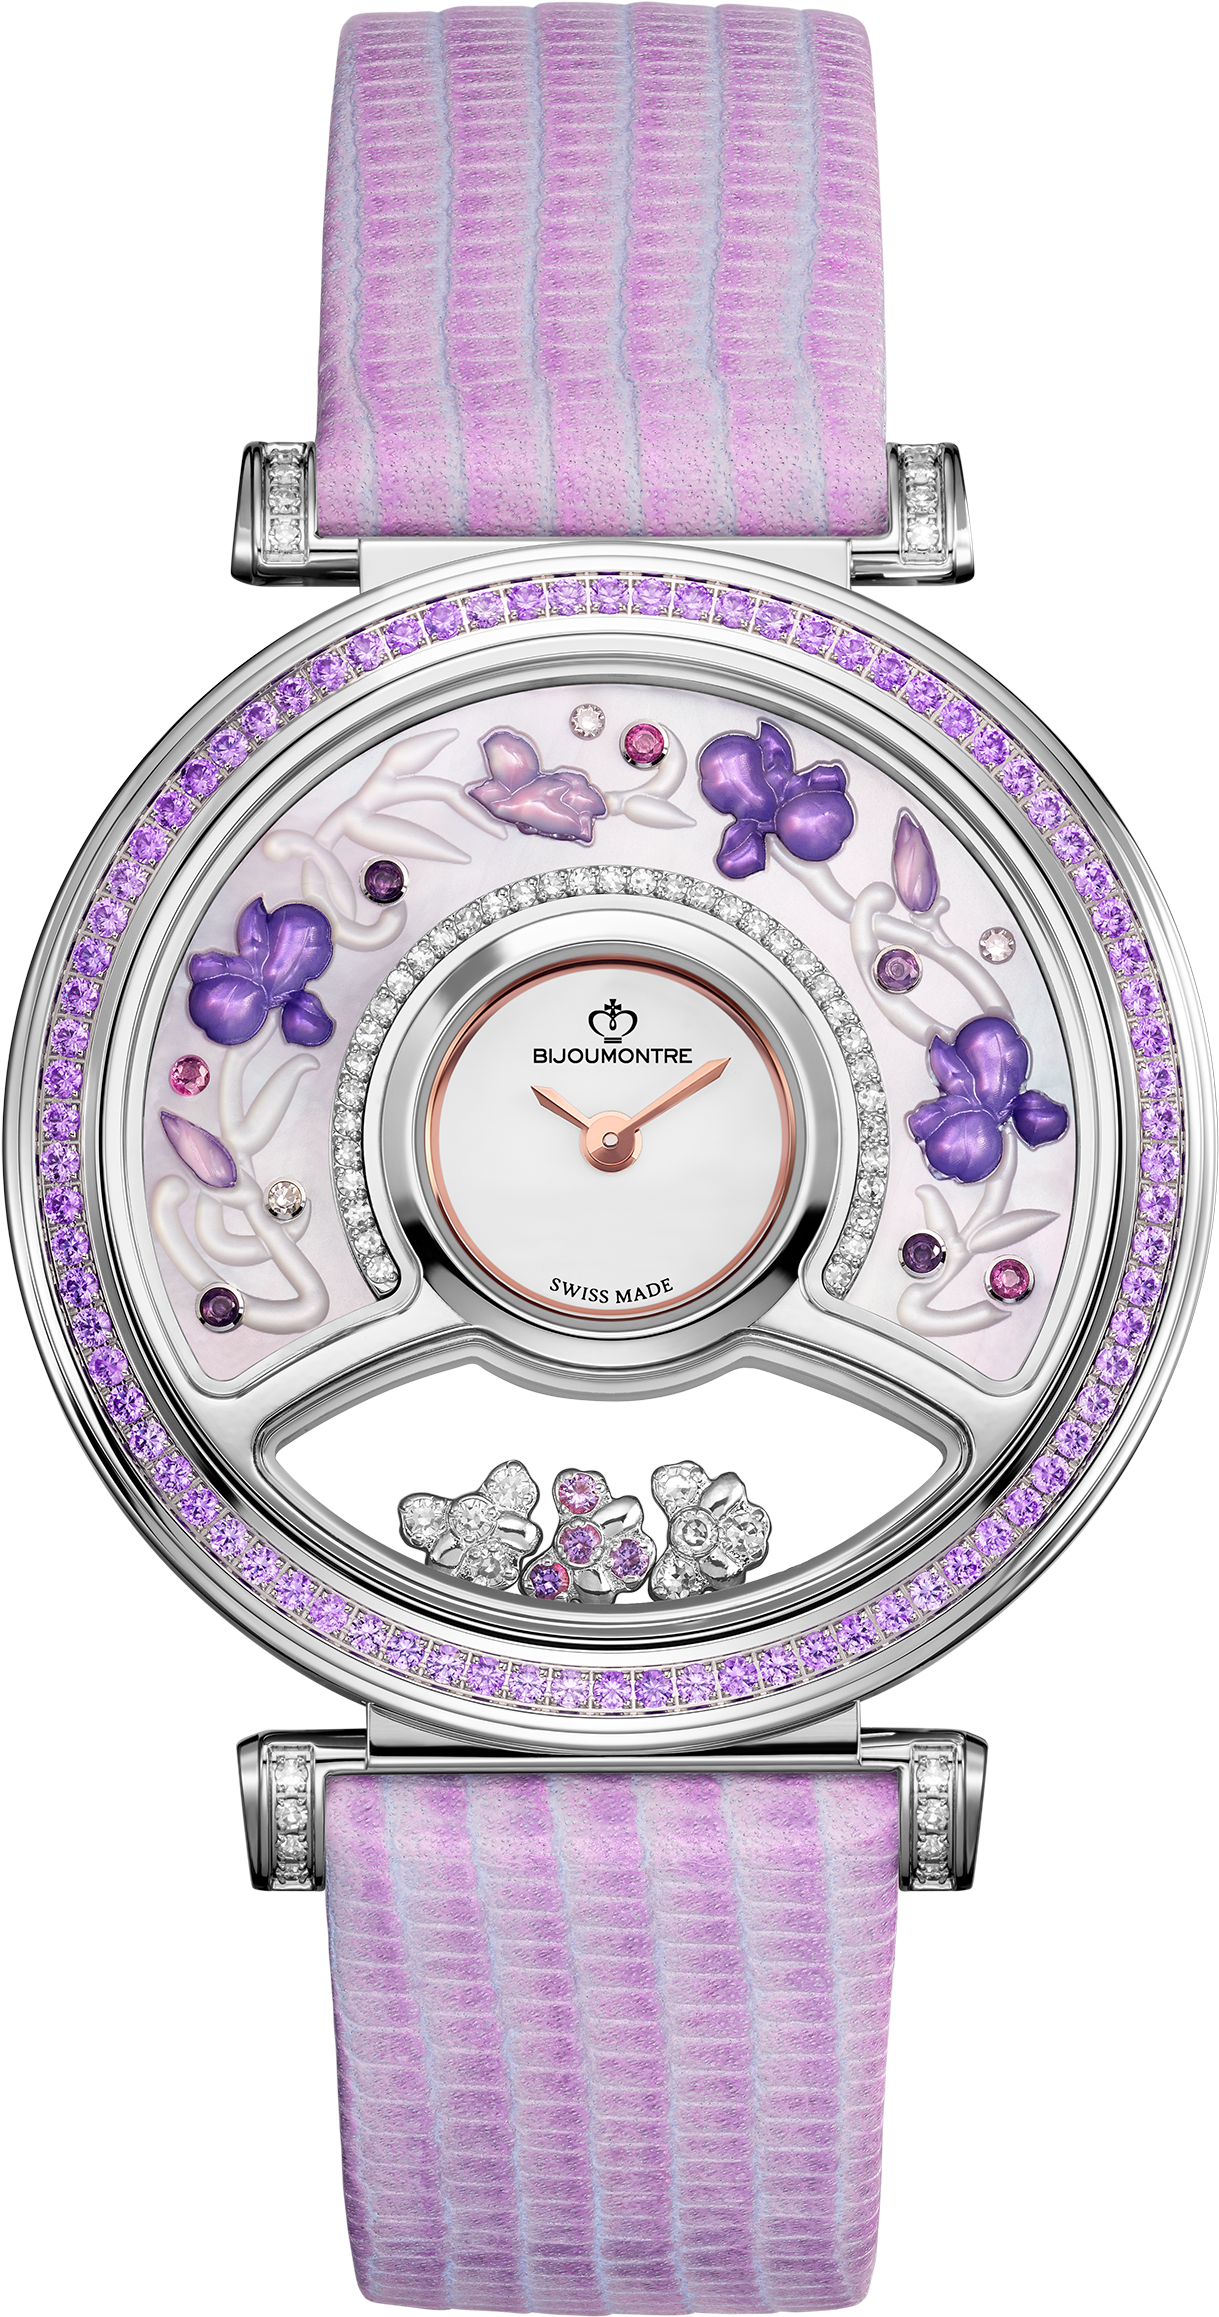 A Watch With Purple Stones And Flowers